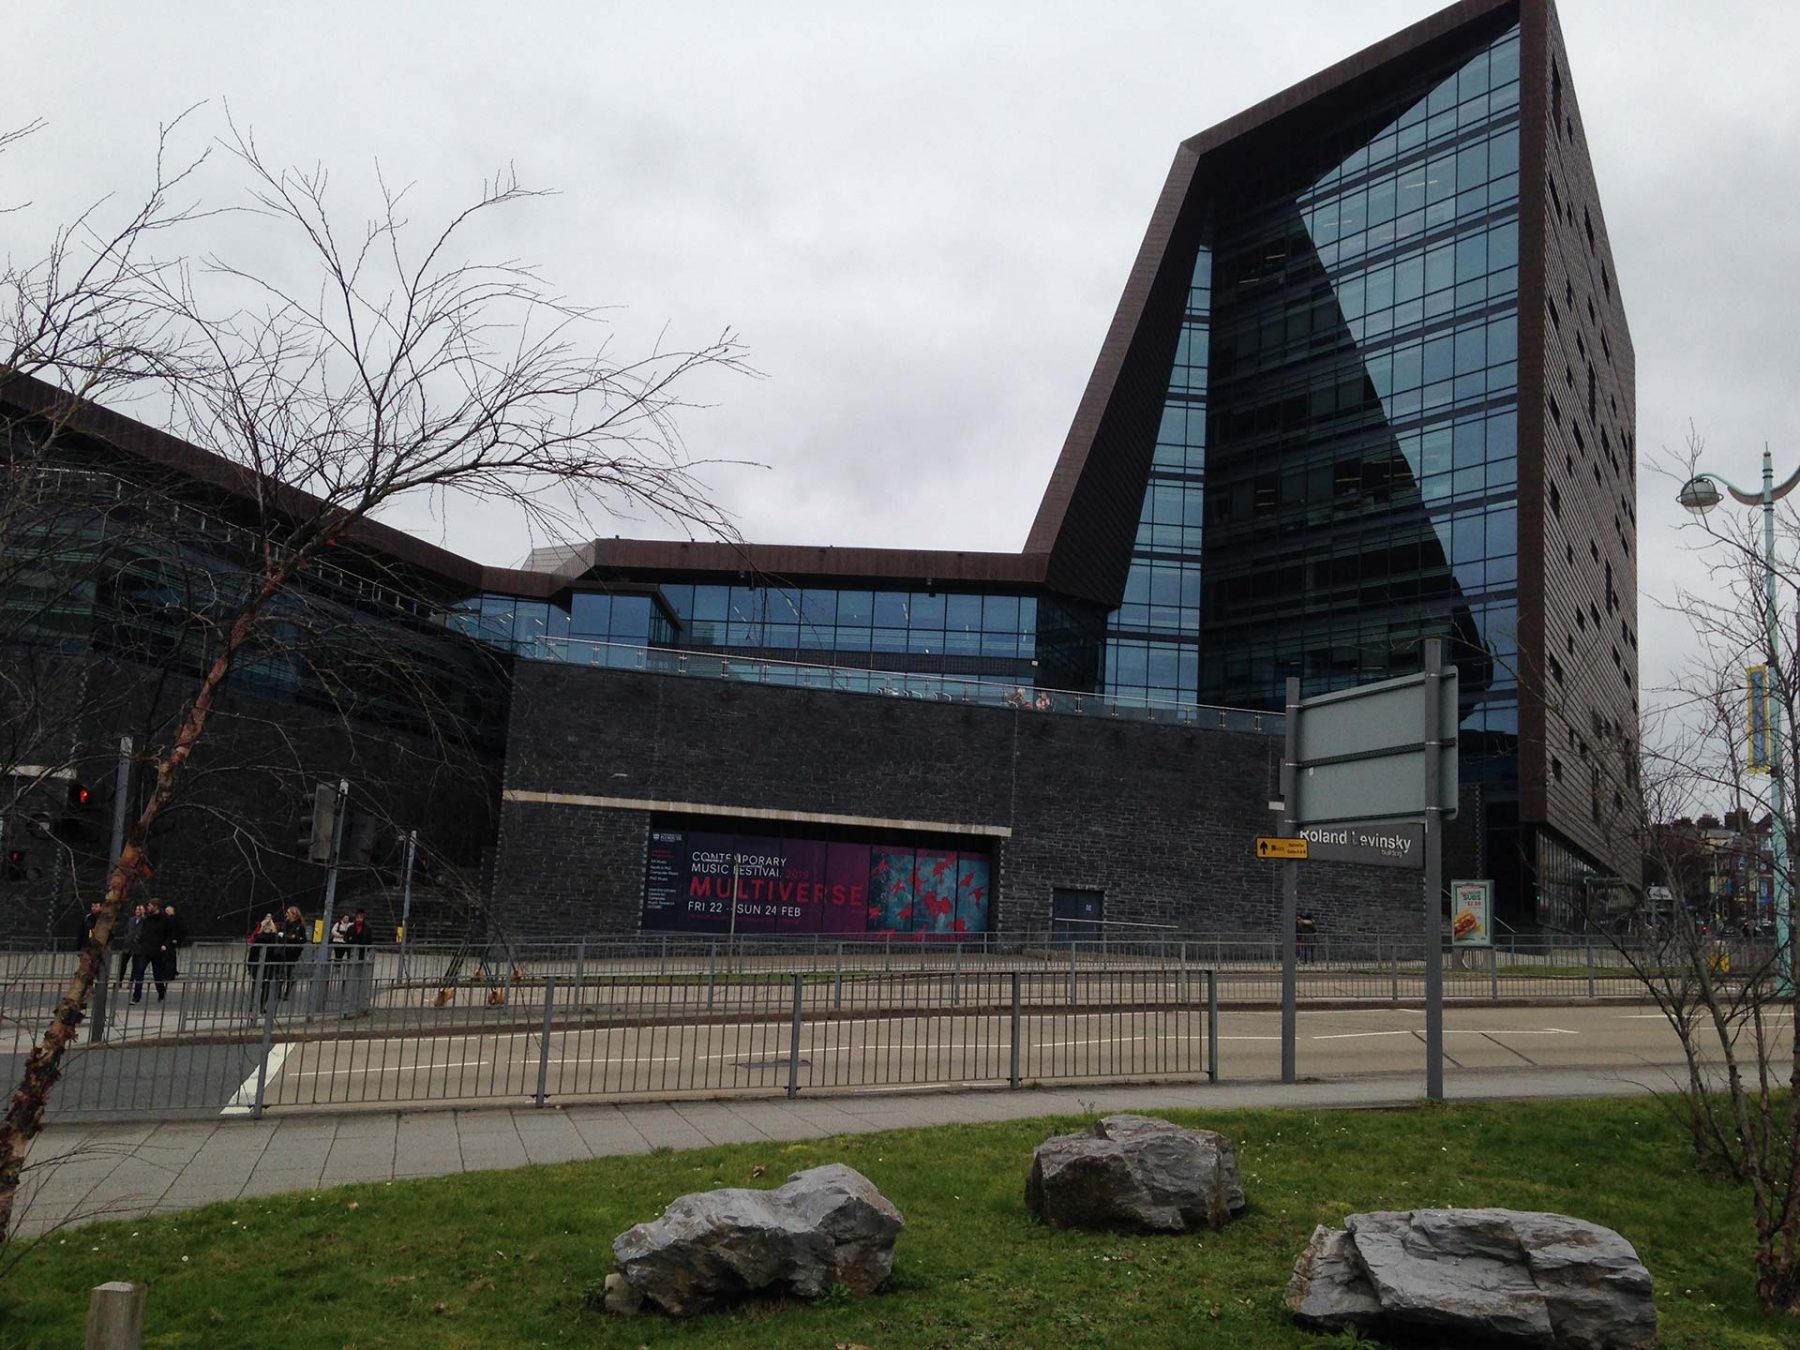 Multiverse Contemporary Music Festival (2019), Roland Lewinsky Building, University of Plymouth, UK